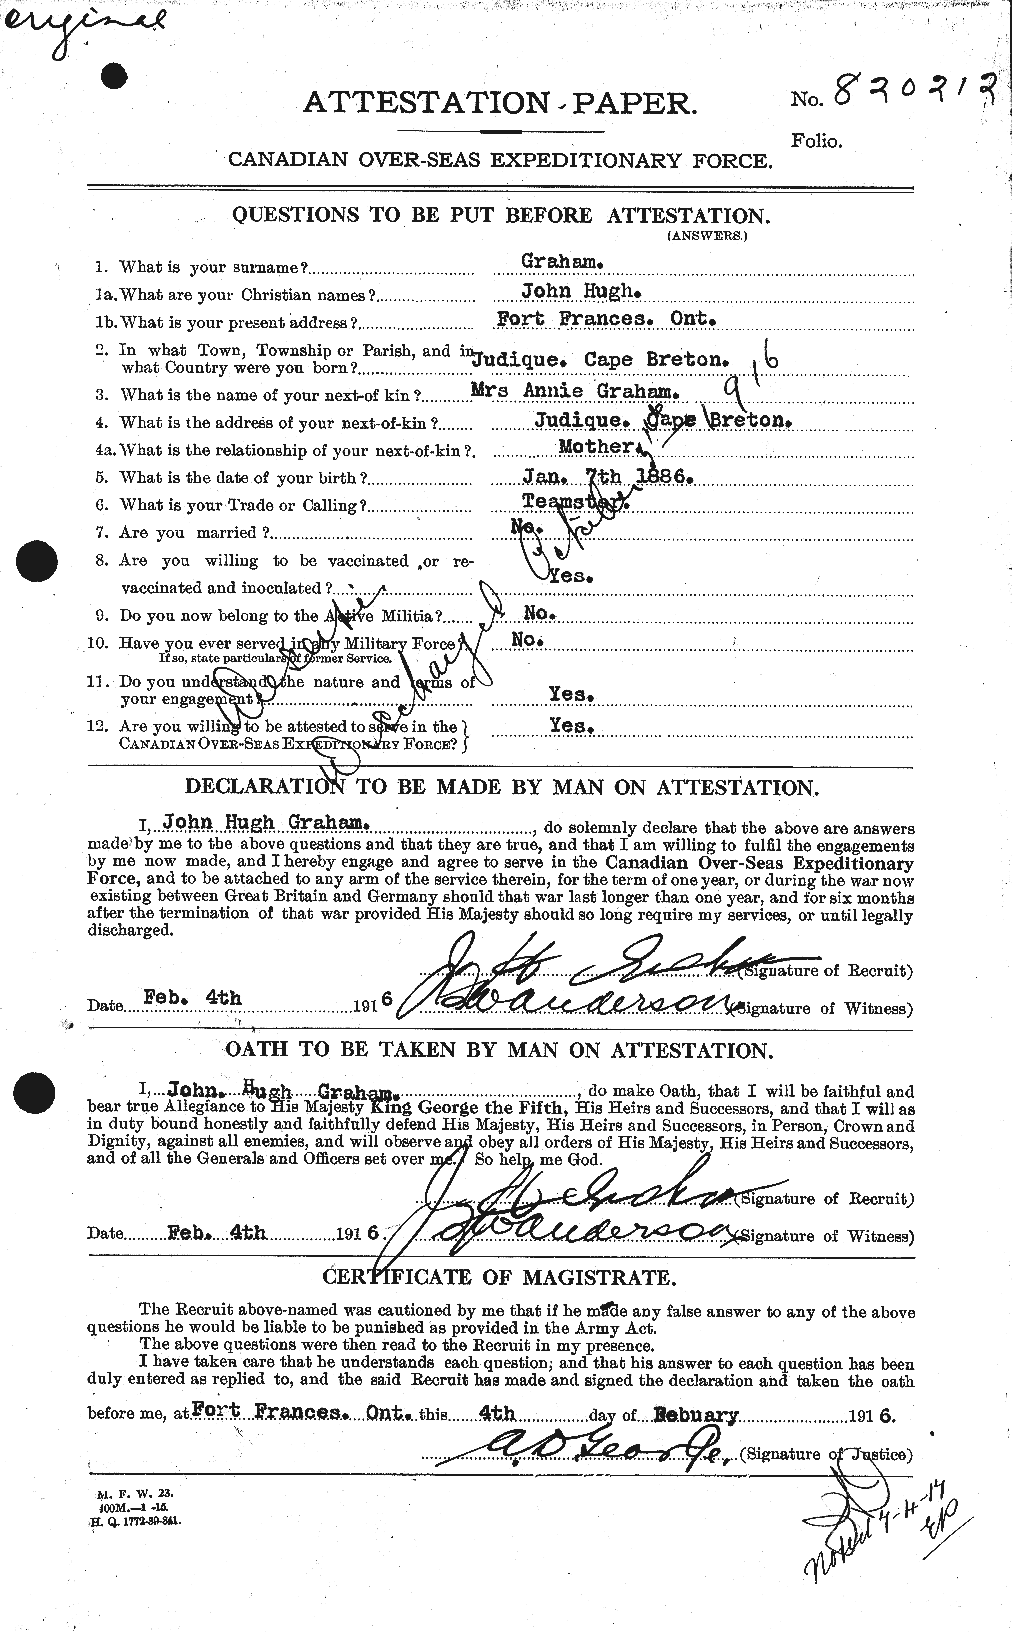 Personnel Records of the First World War - CEF 359184a